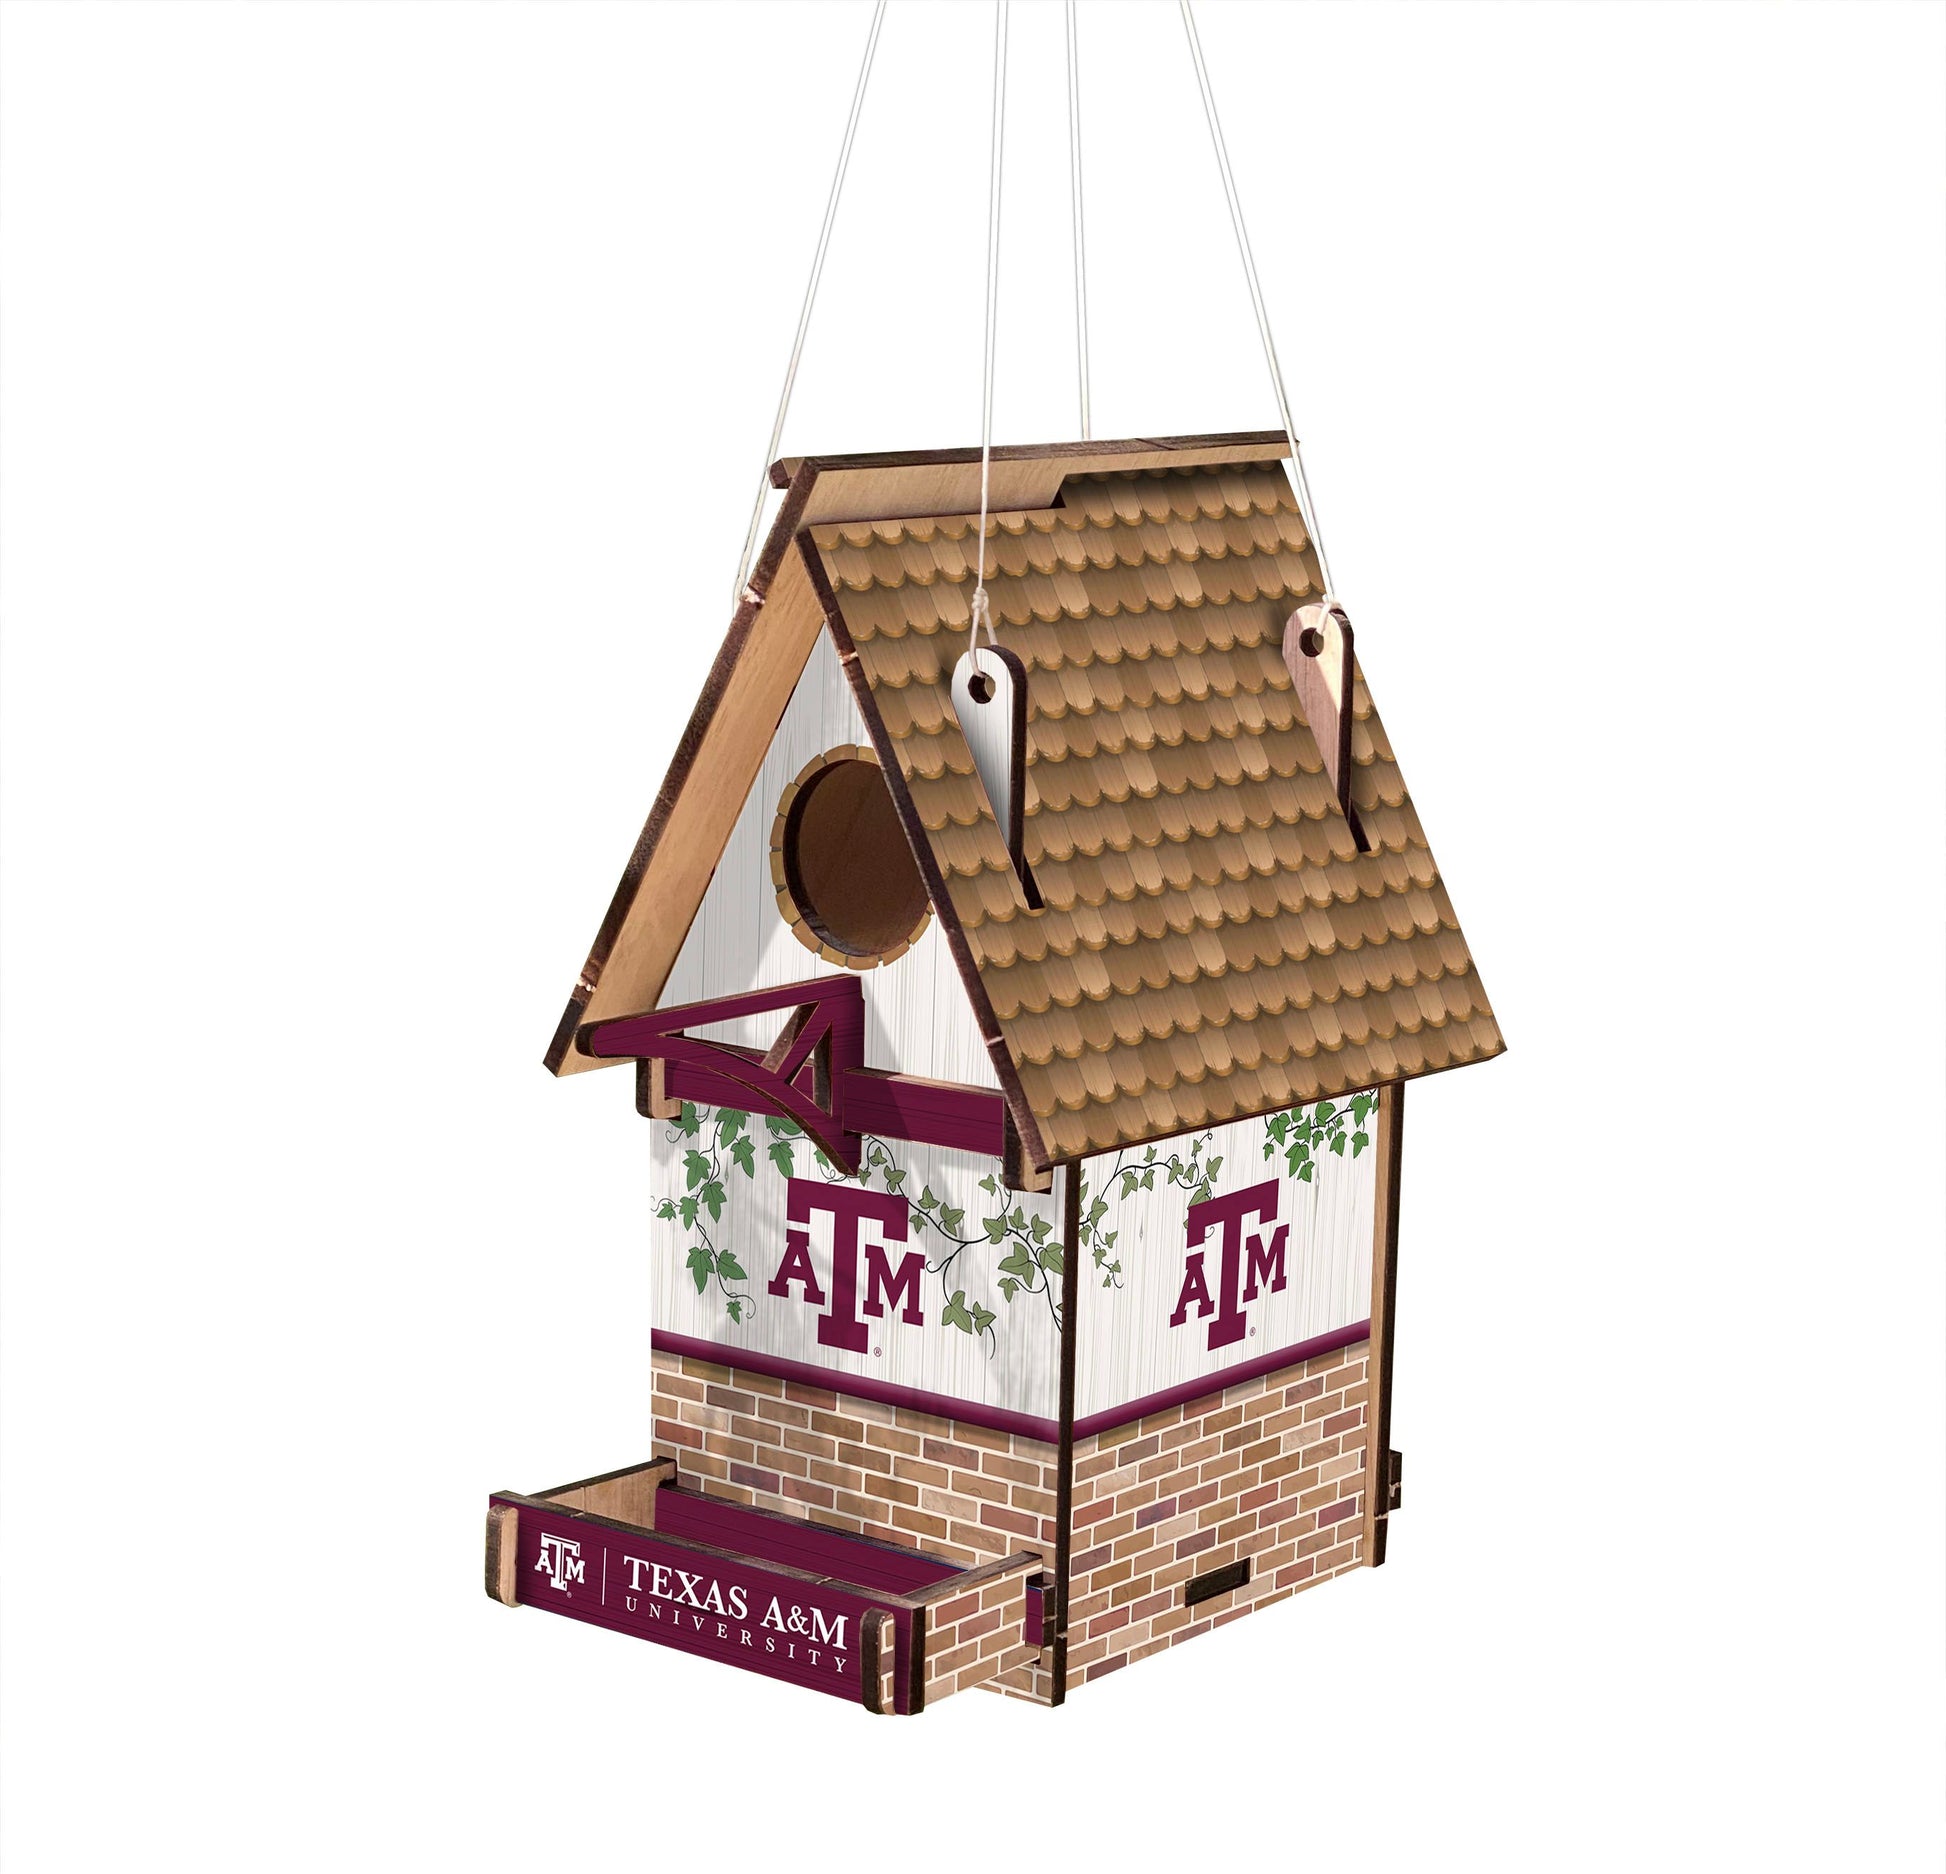 Show your support for the Texas A&amp;M Aggies with this officially licensed NCAA wood birdhouse. Cut and printed in the USA, this birdhouse is 15" x 15" and features team graphics and colors.